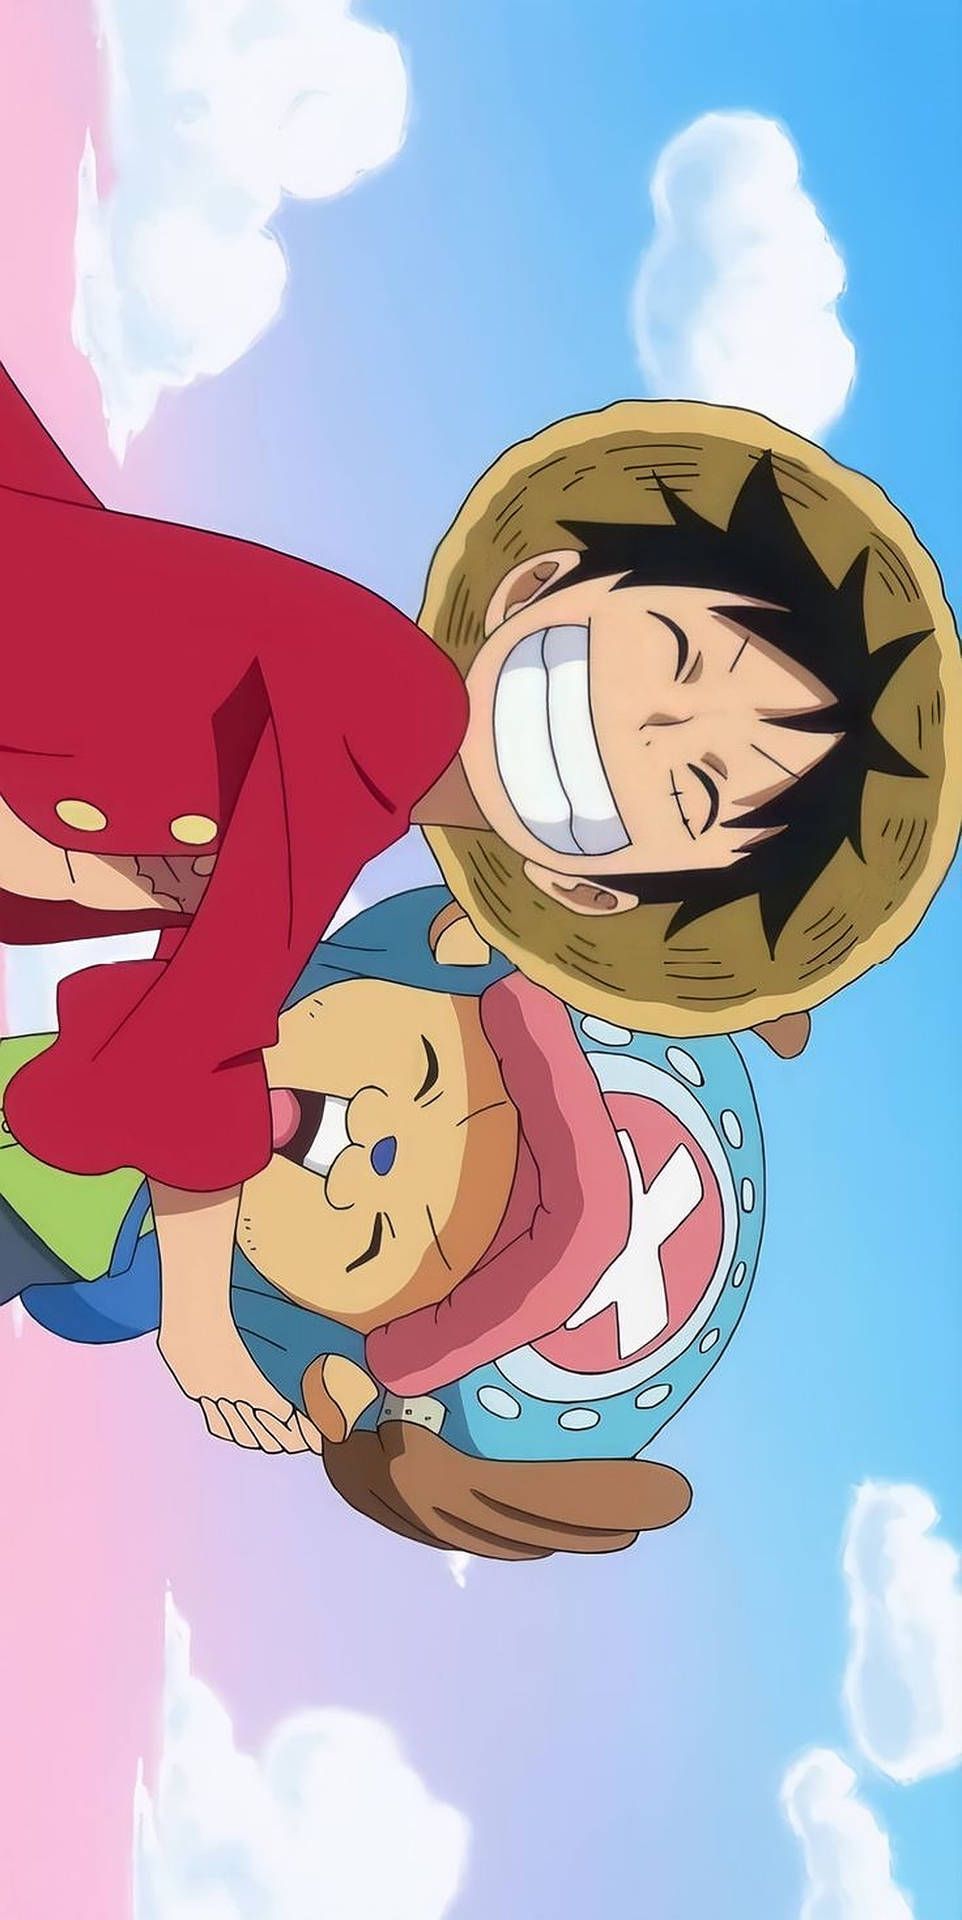 Caption: Luffy And Chopper From One Piece On Iphone Background